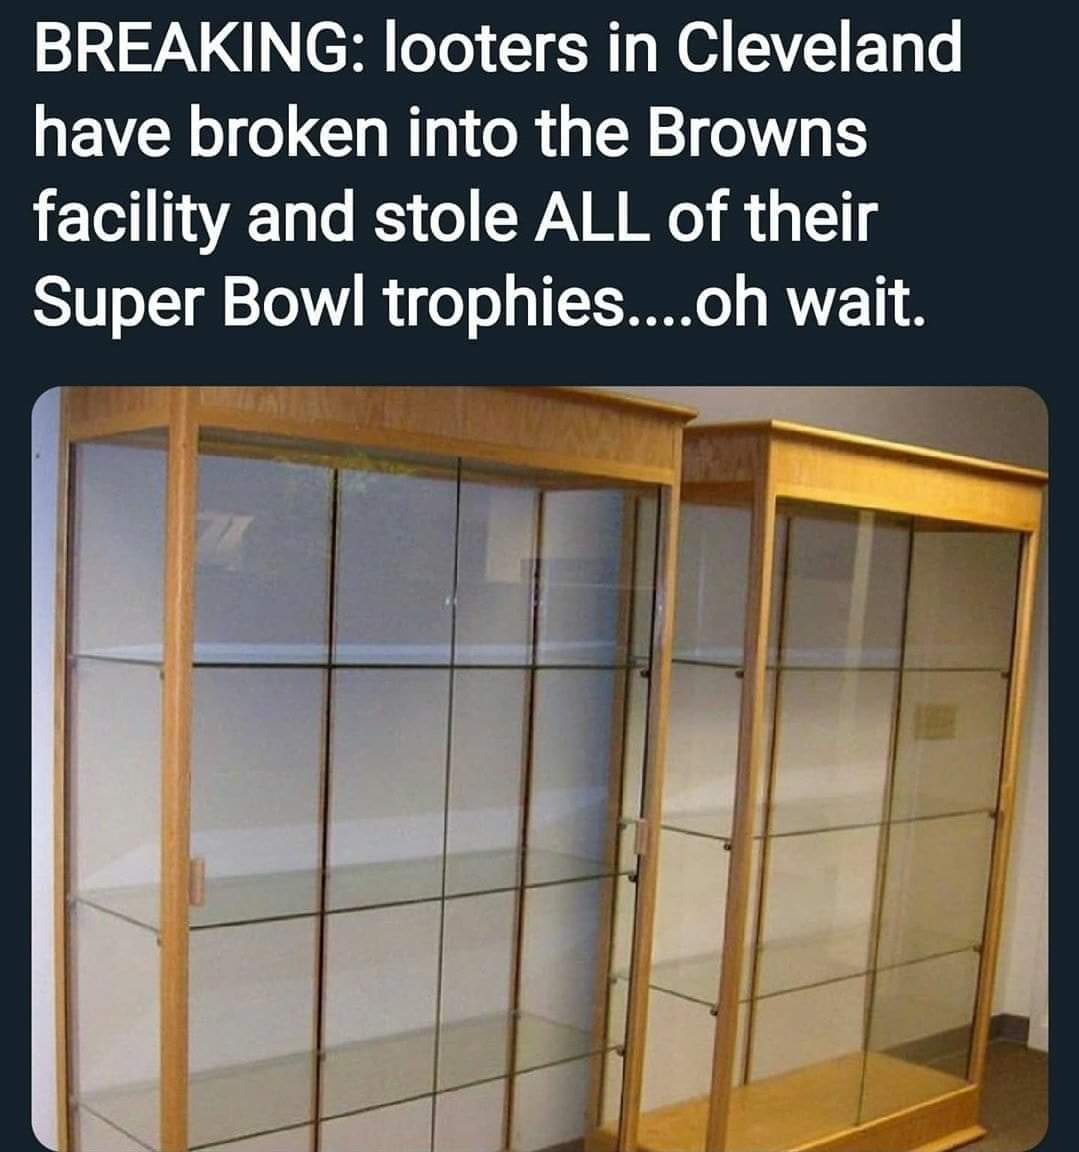 display case - Breaking looters in Cleveland have broken into the Browns facility and stole All of their Super Bowl trophies....oh wait.